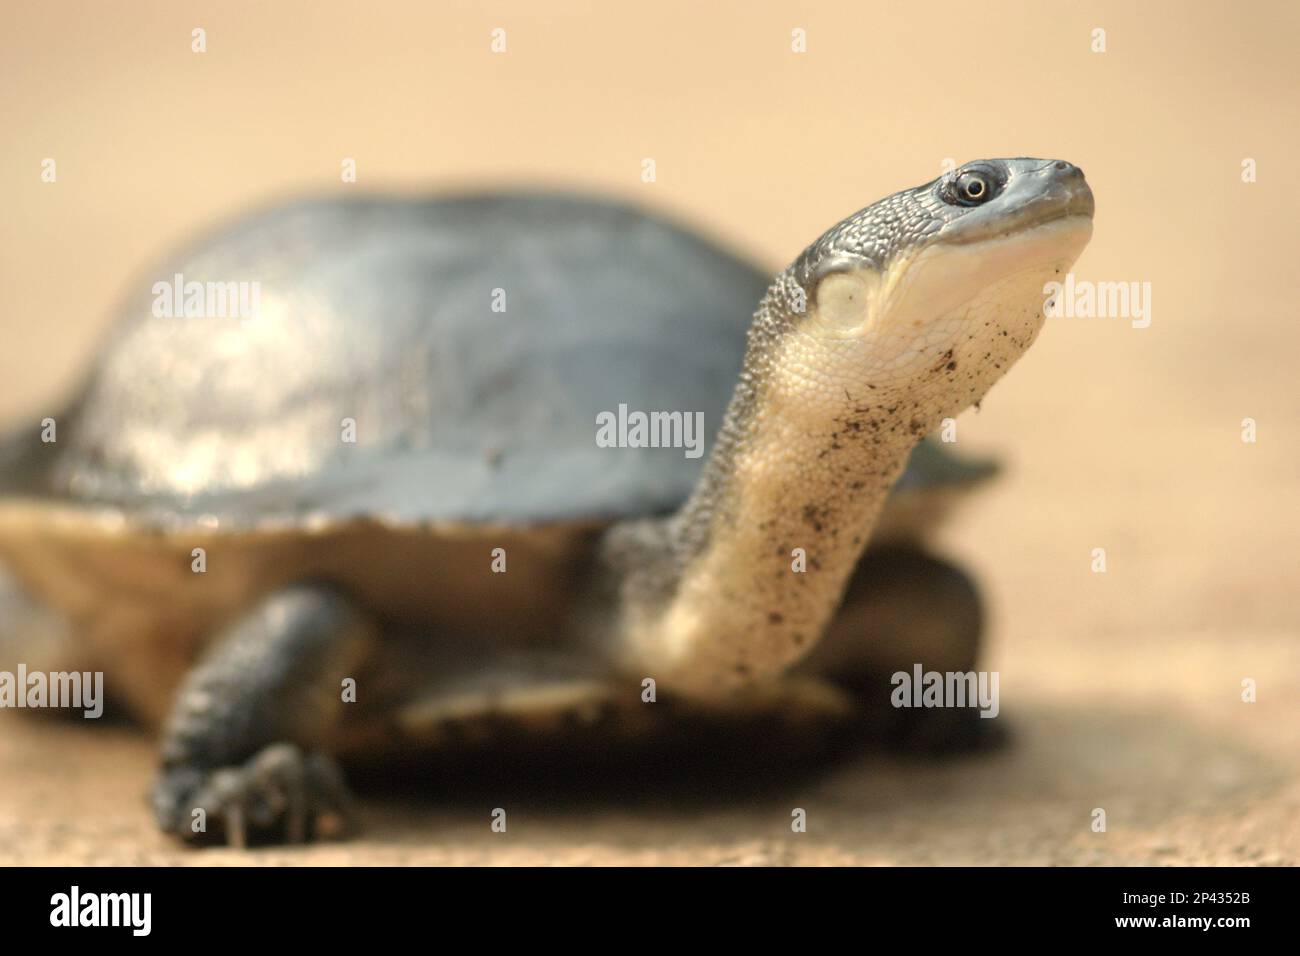 A rare and threatened species of freshwater turtle, the critically endangered Rote Island's endemic snake-necked turtle (Chelodina mccordi) is photographed at a licensed ex-situ breeding facility in Jakarta, Indonesia. Scientific research suggests that reptile richness is likely to decrease significantly across most parts of the world with ongoing future climate change. 'Together with other anthropogenic impacts, such as habitat loss and harvesting of species, this is a cause for concern,' wrote a team of scientists led by Matthias Biber (Technical University of Munich). Stock Photo